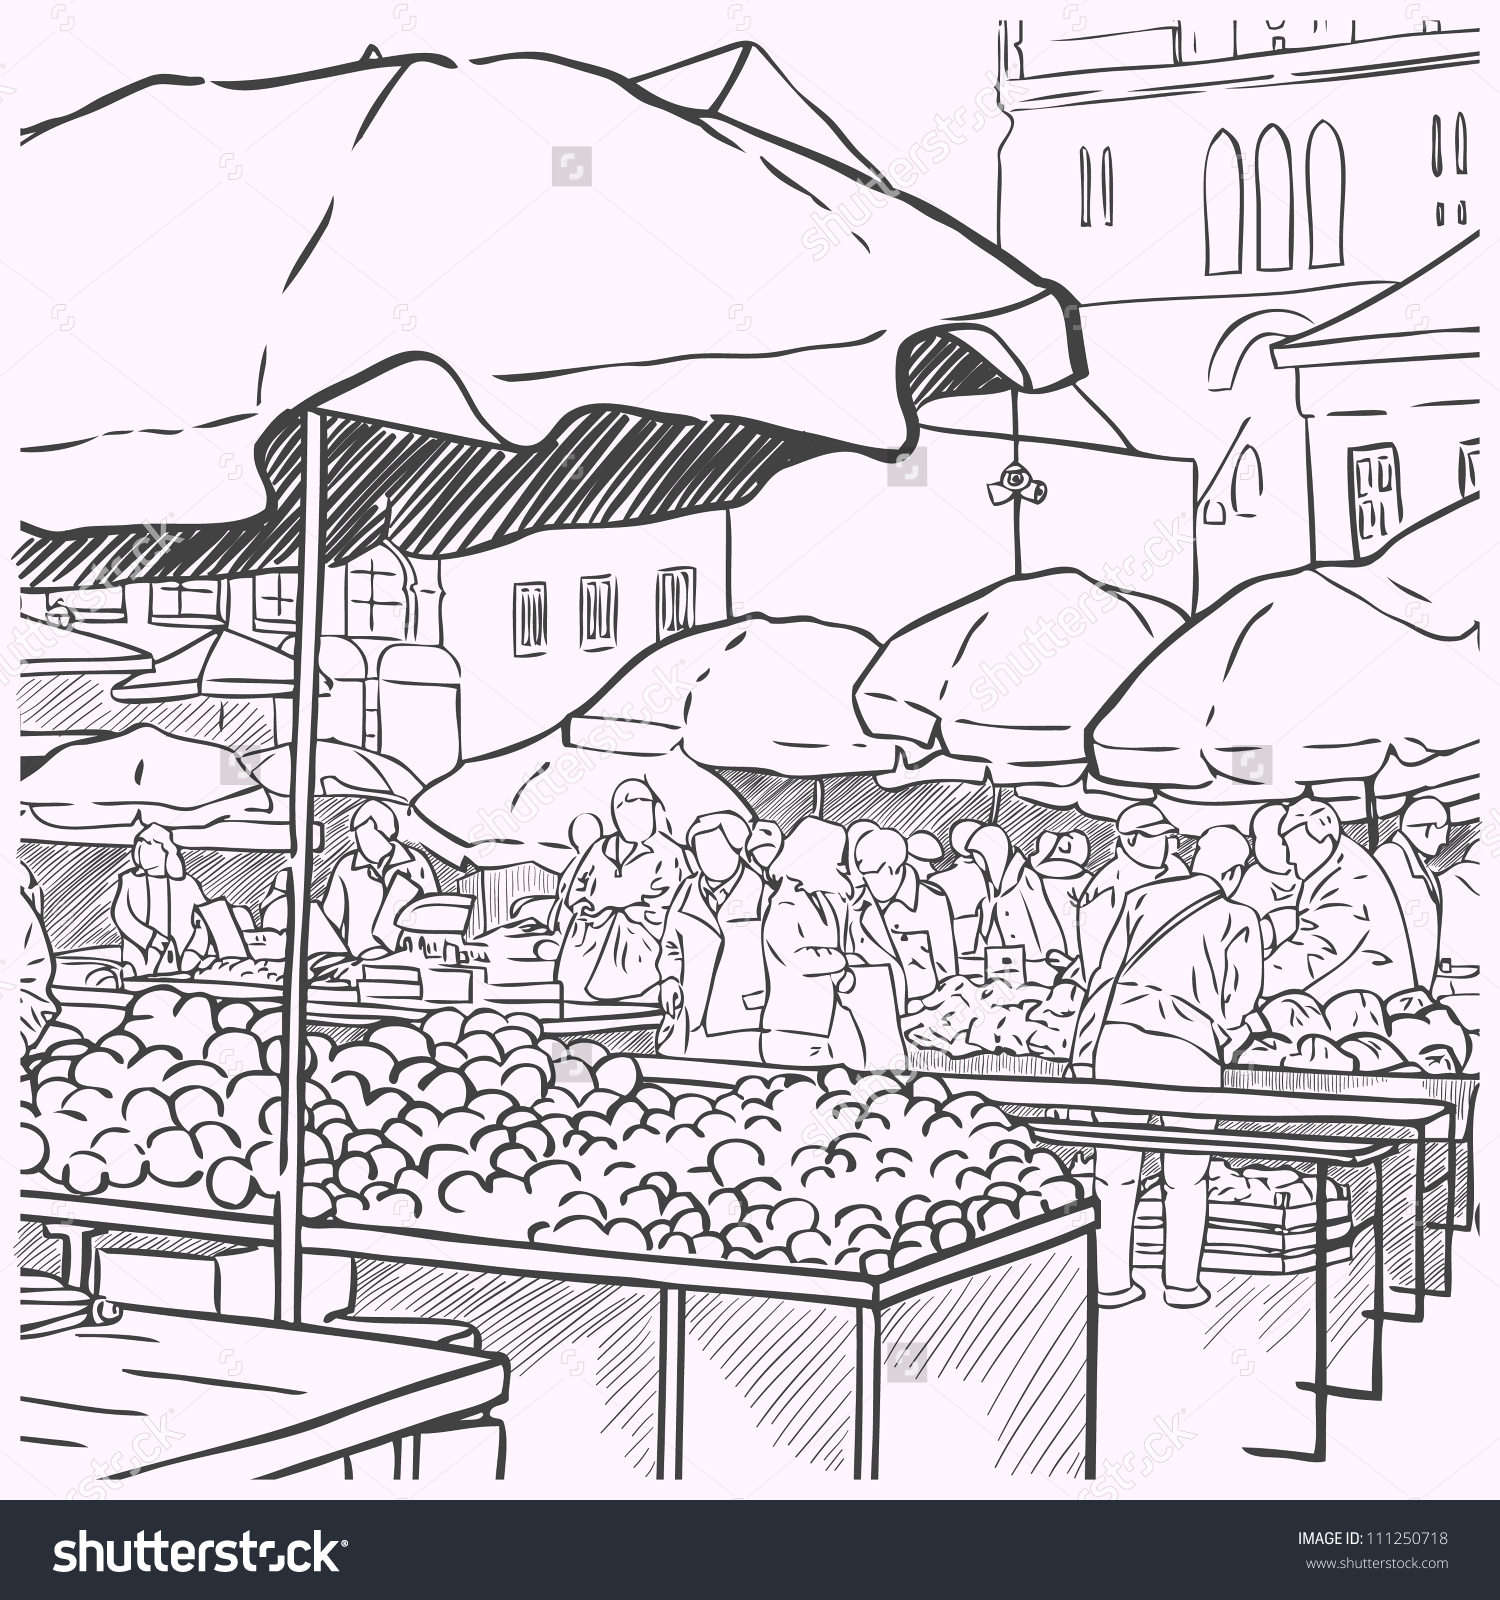 Outdoor market tents and people clipart black and white 